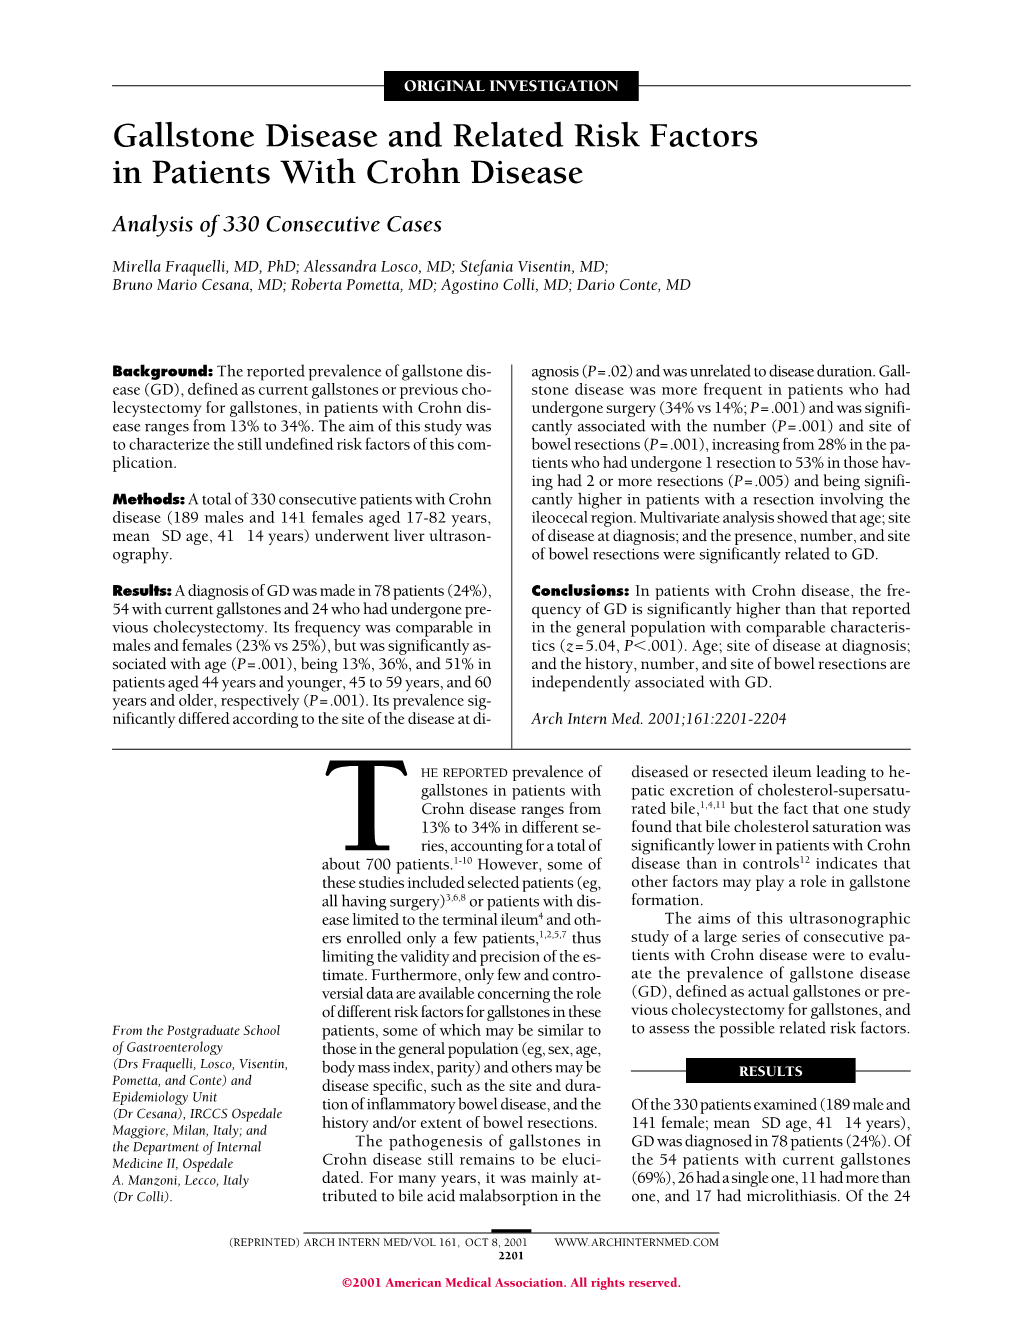 Gallstone Disease and Related Risk Factors in Patients with Crohn Disease Analysis of 330 Consecutive Cases